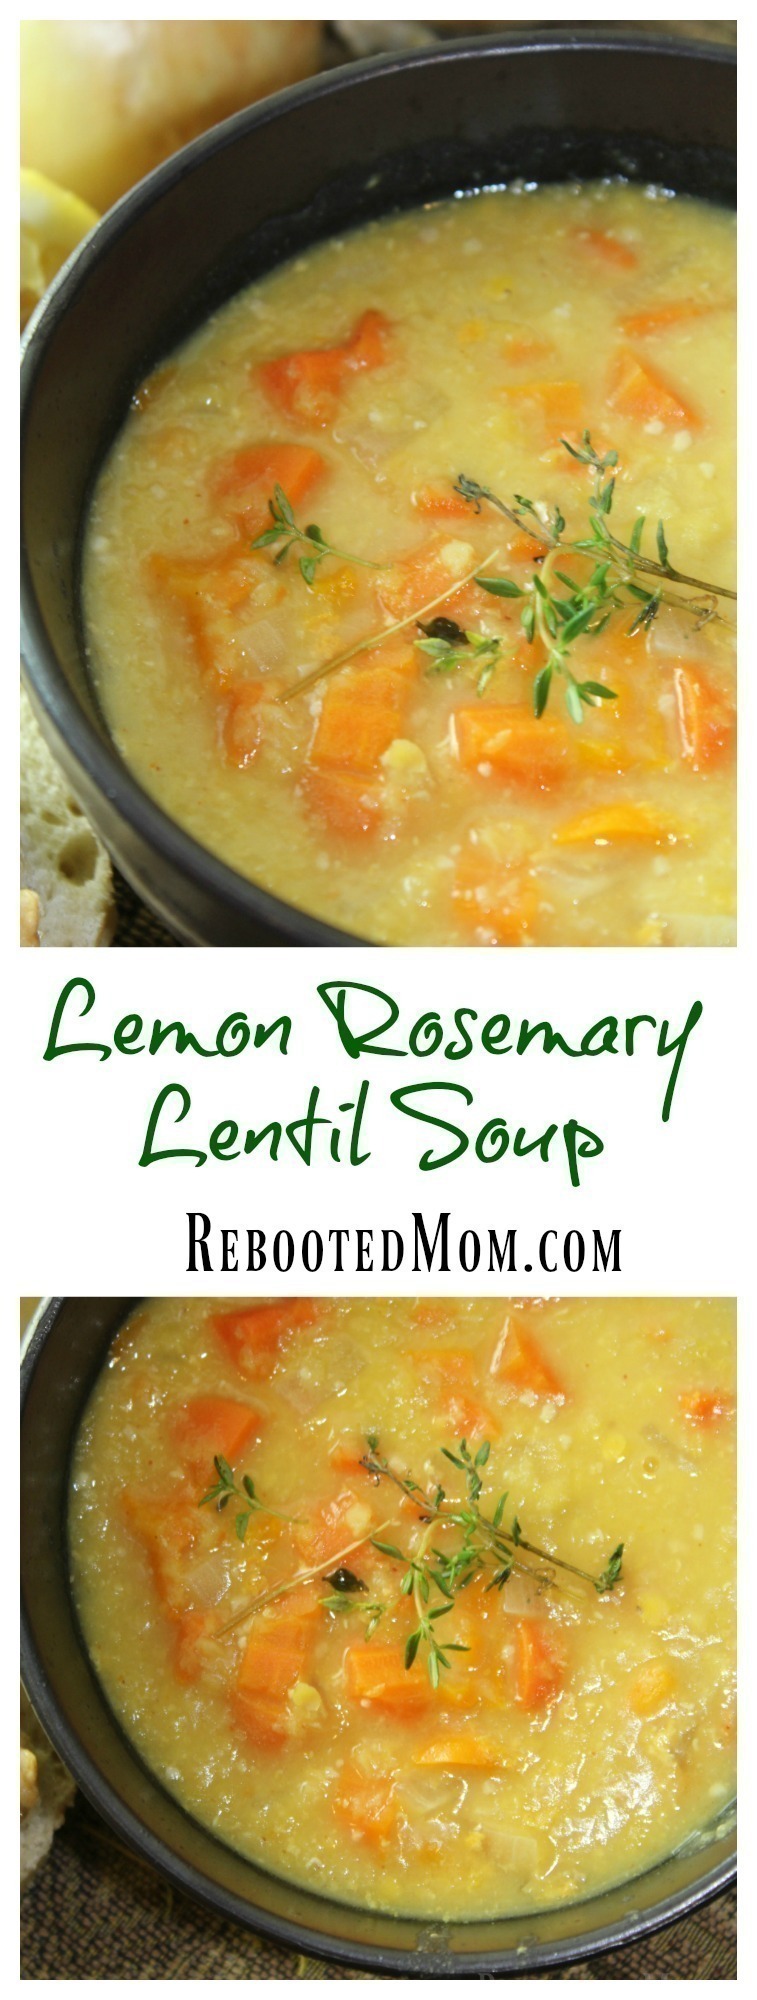 Fresh carrots, bell pepper, lemon and rosemary combined with red lentils create this easy and savory soup.